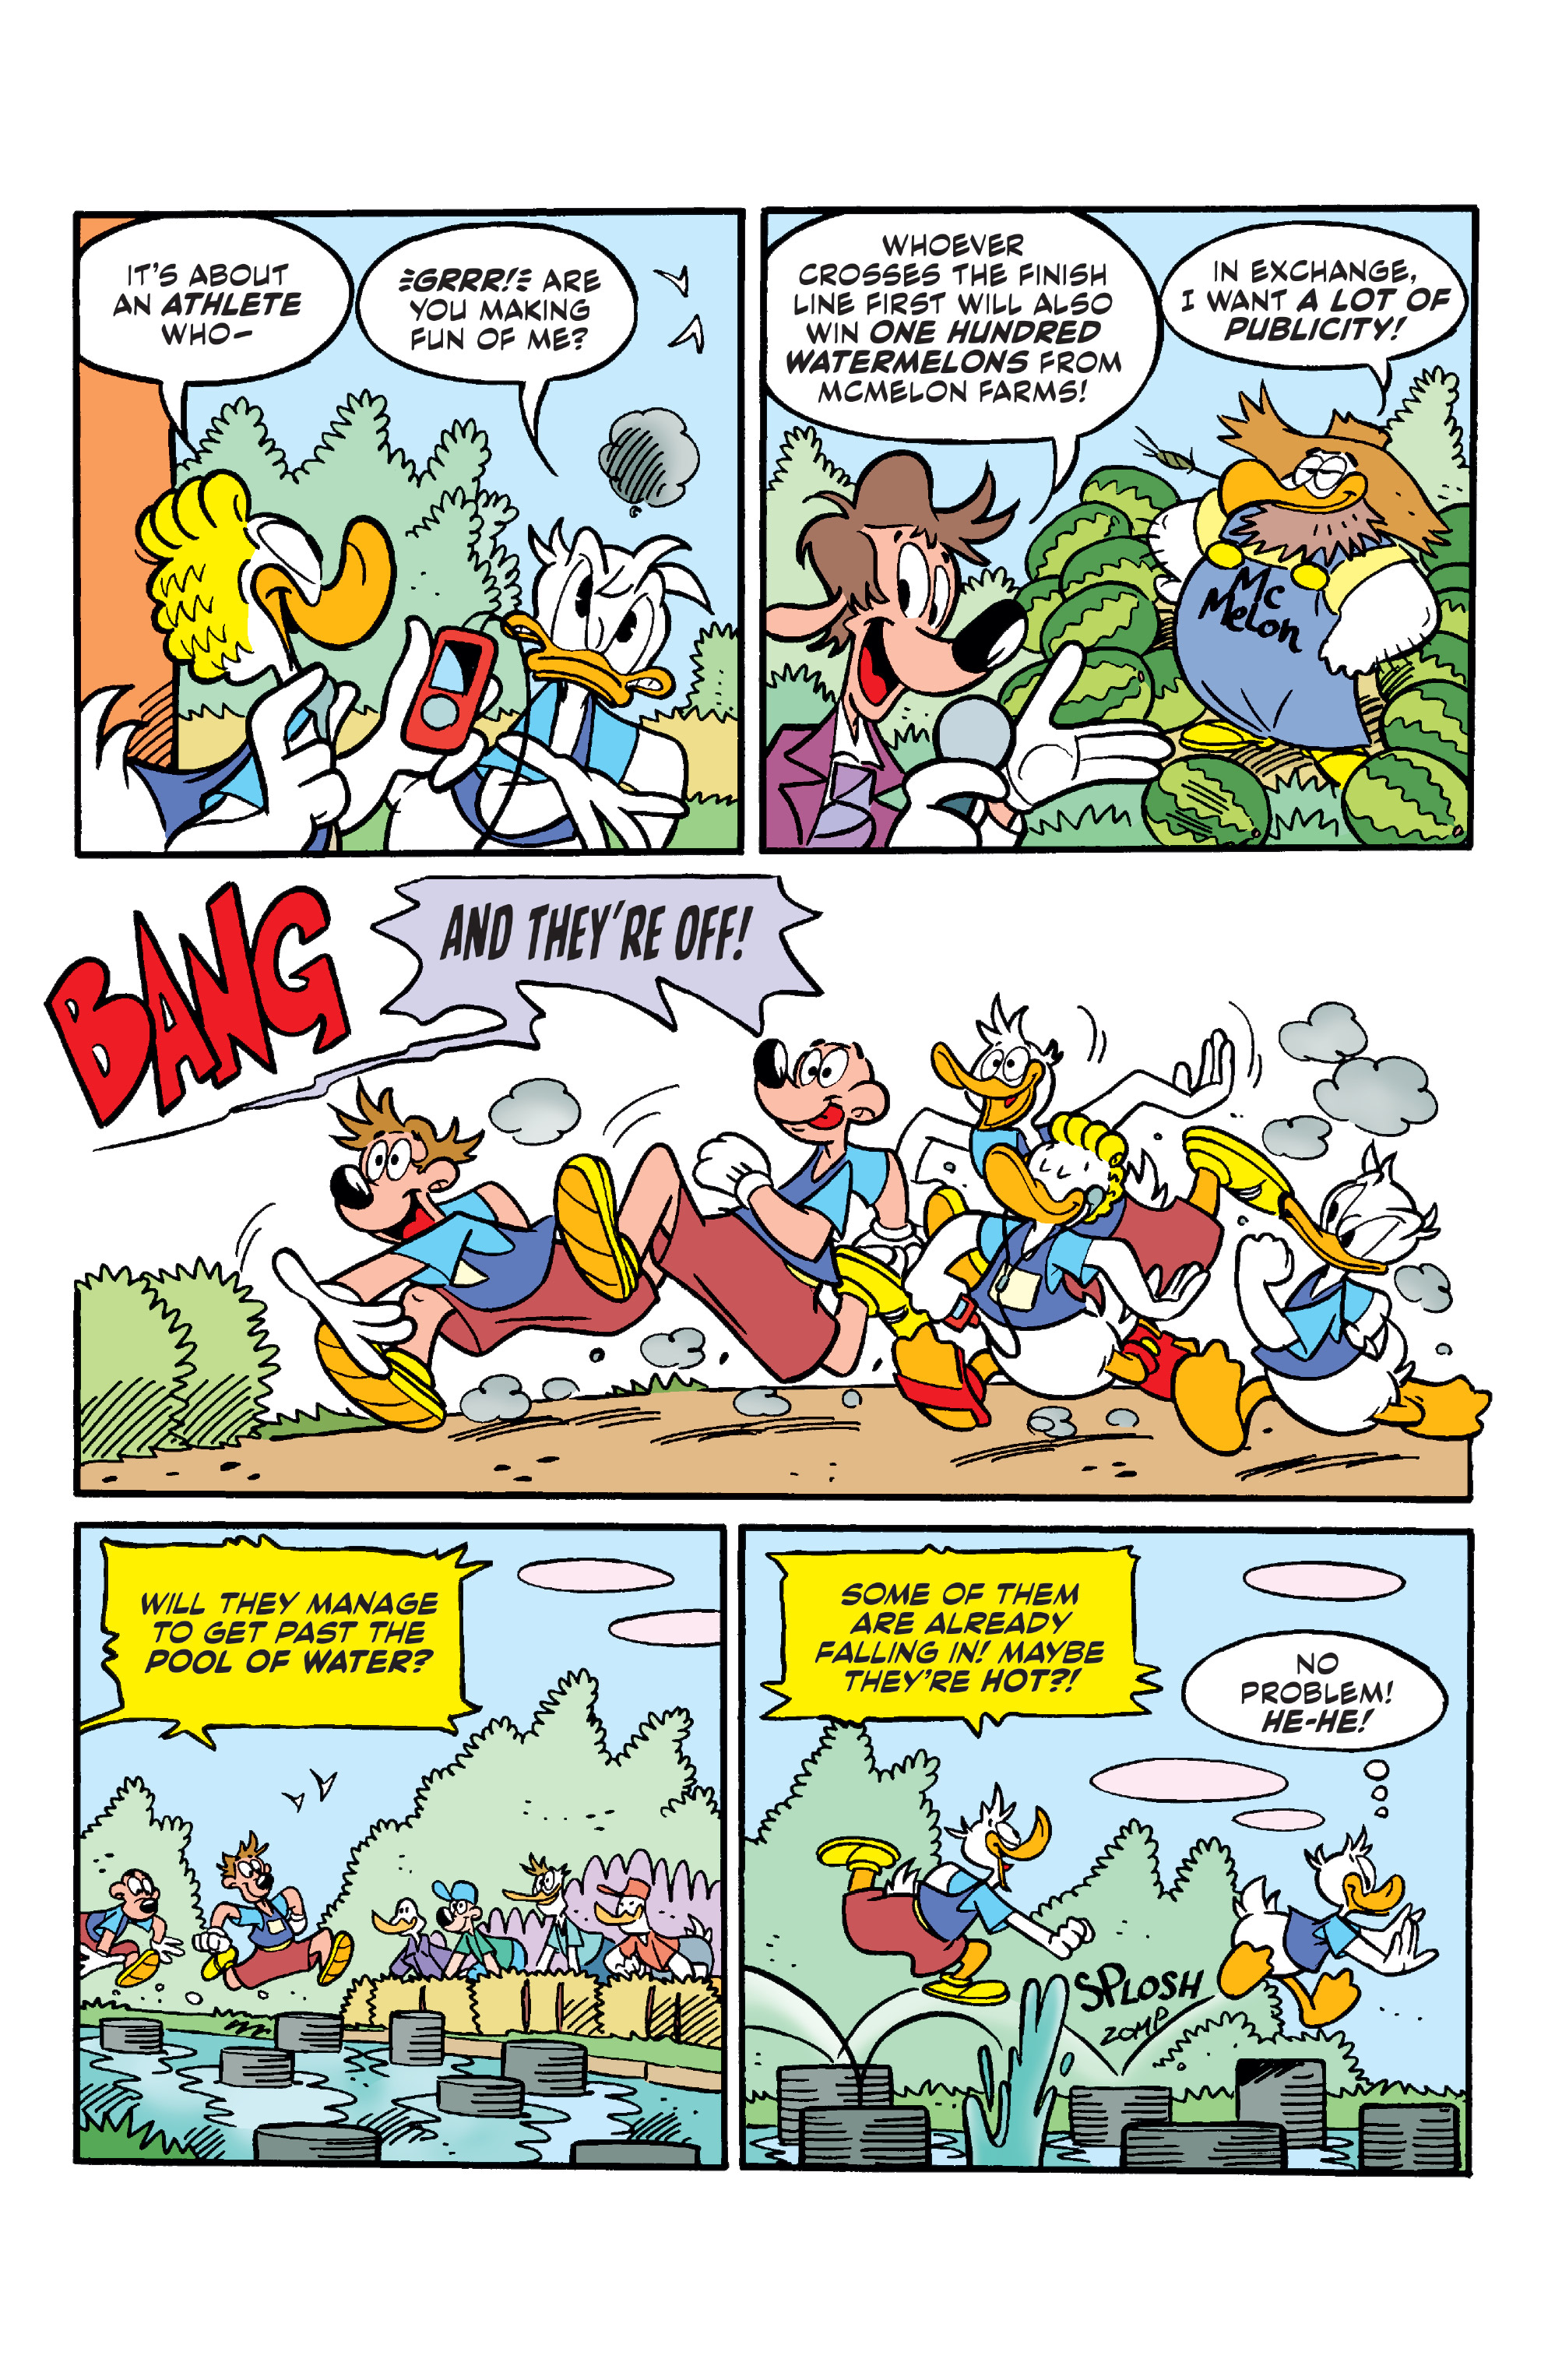 Disney Comics and Stories (2018-): Chapter 6 - Page 4